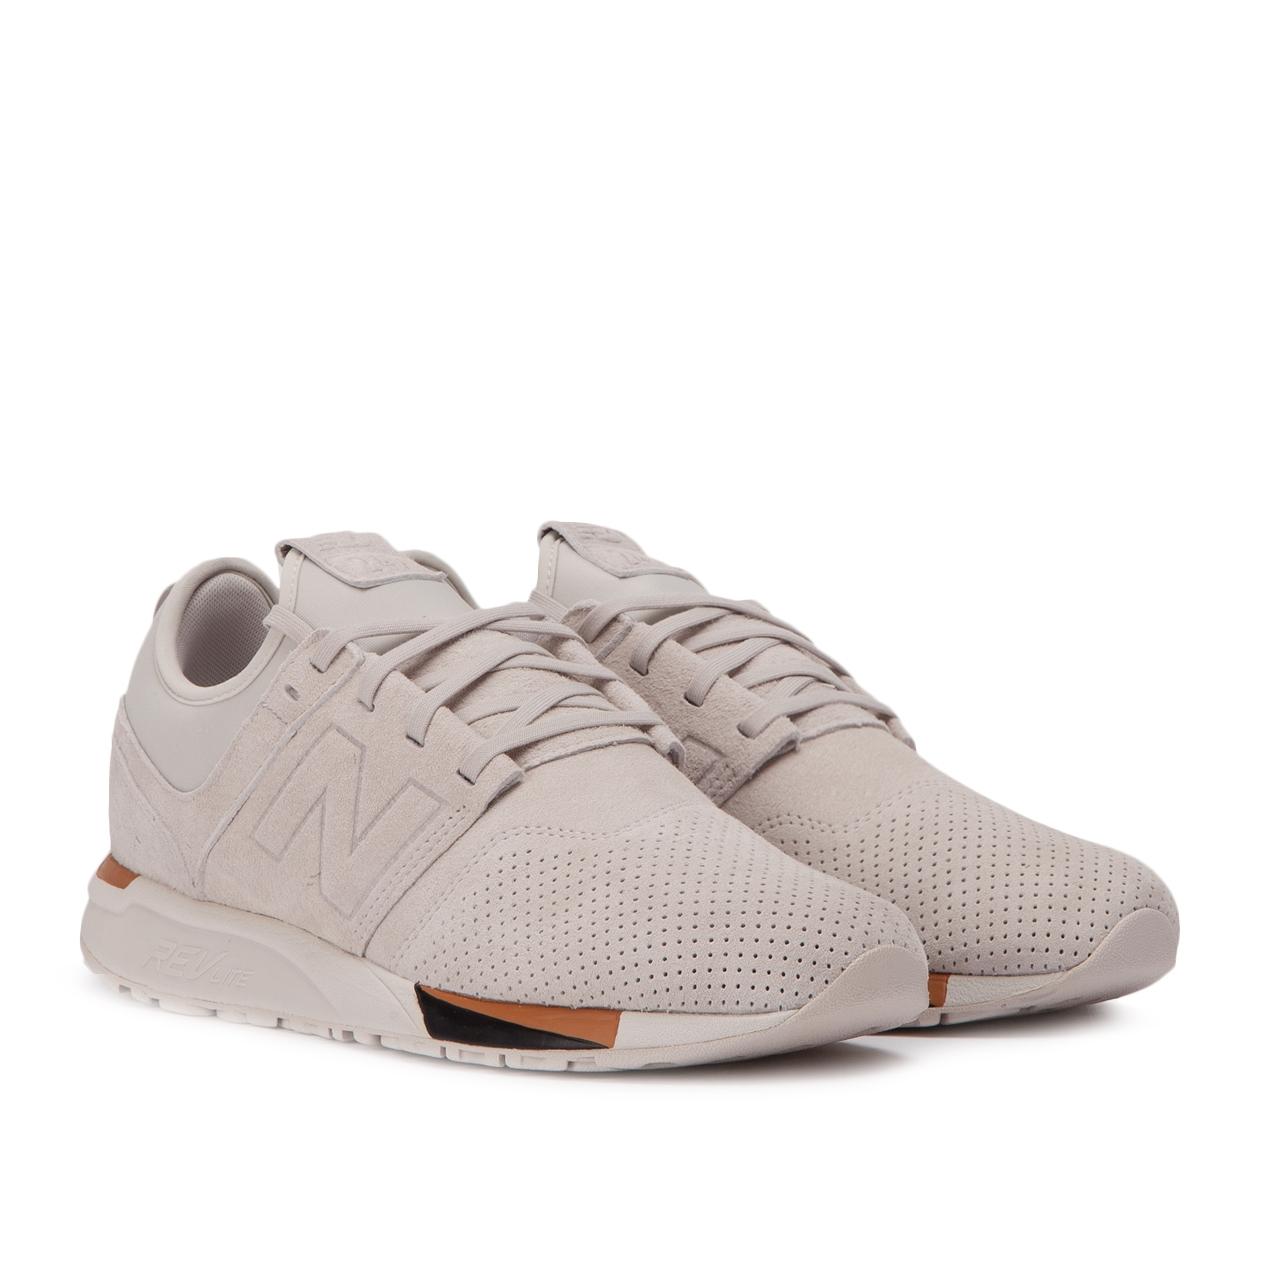 New Balance Leather Mrl 247 Ws in White 